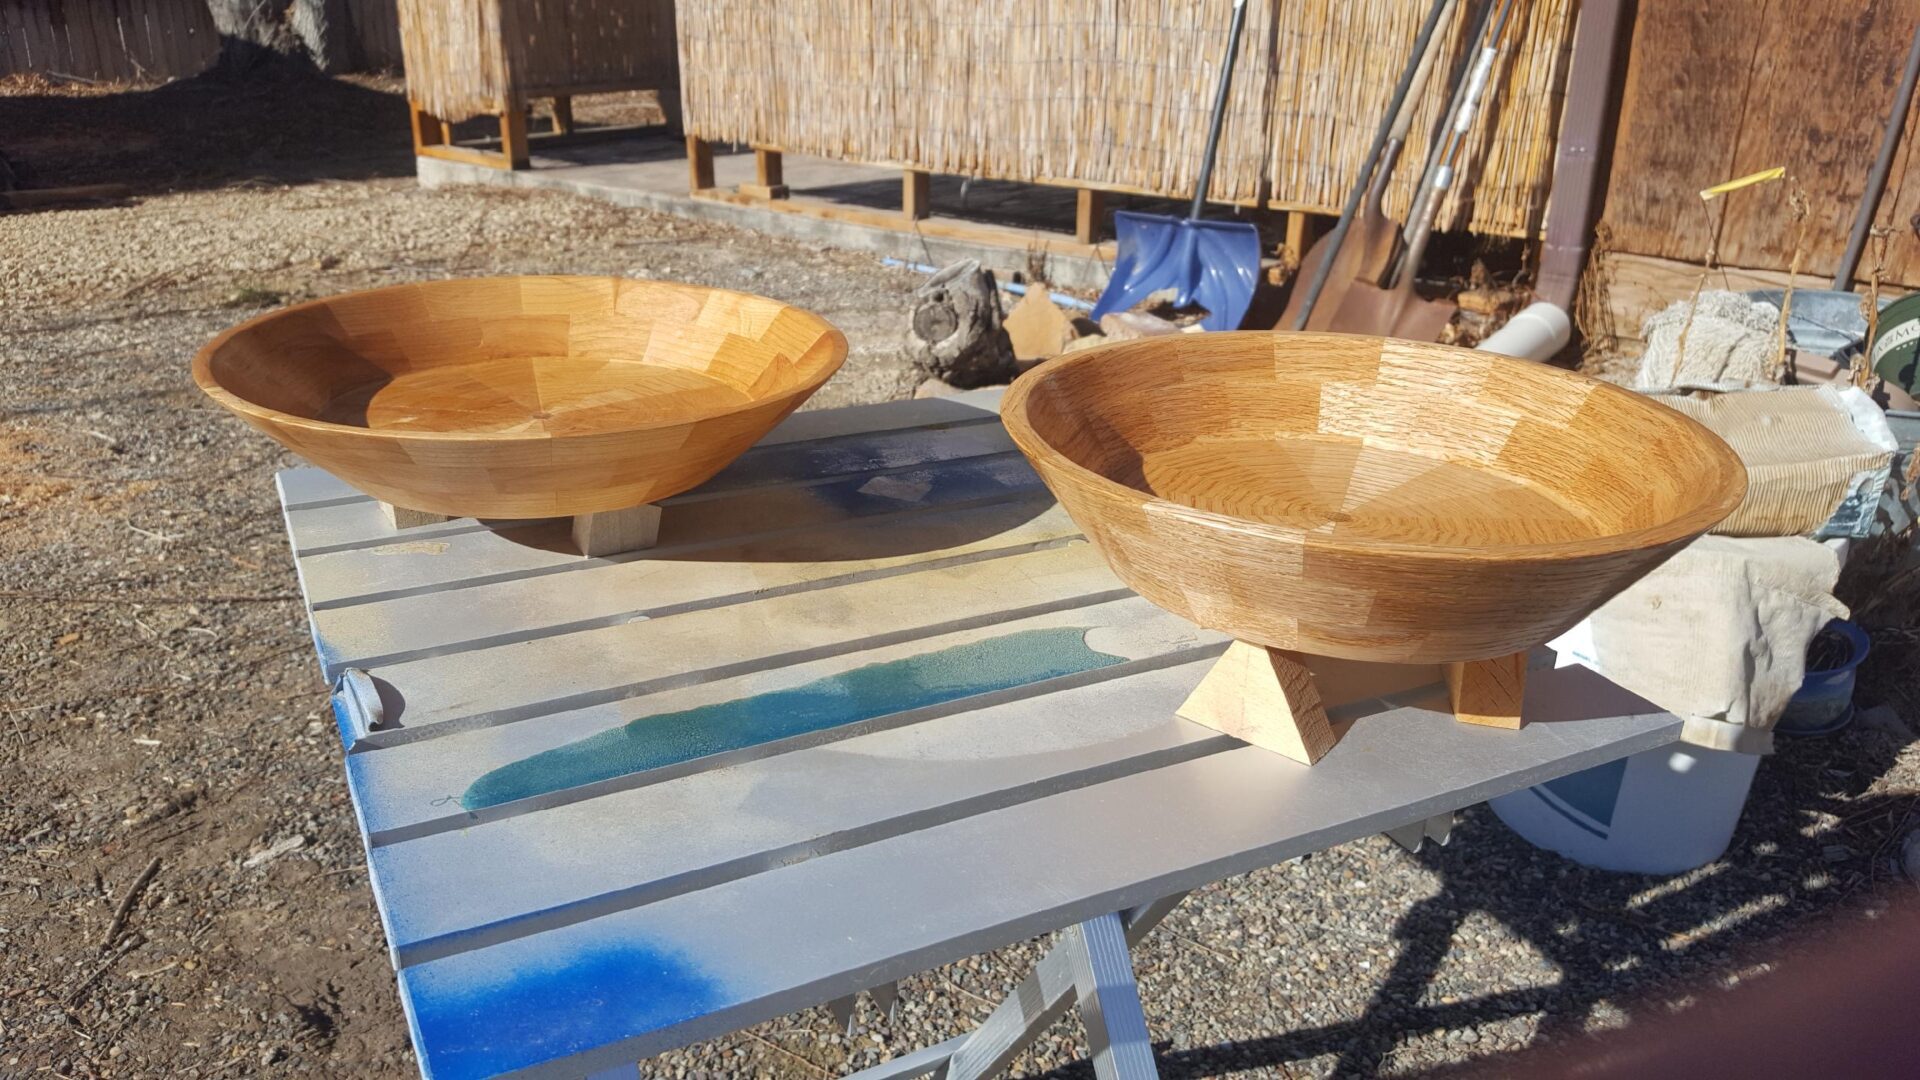 Two wooden bowls sitting on top of a table.